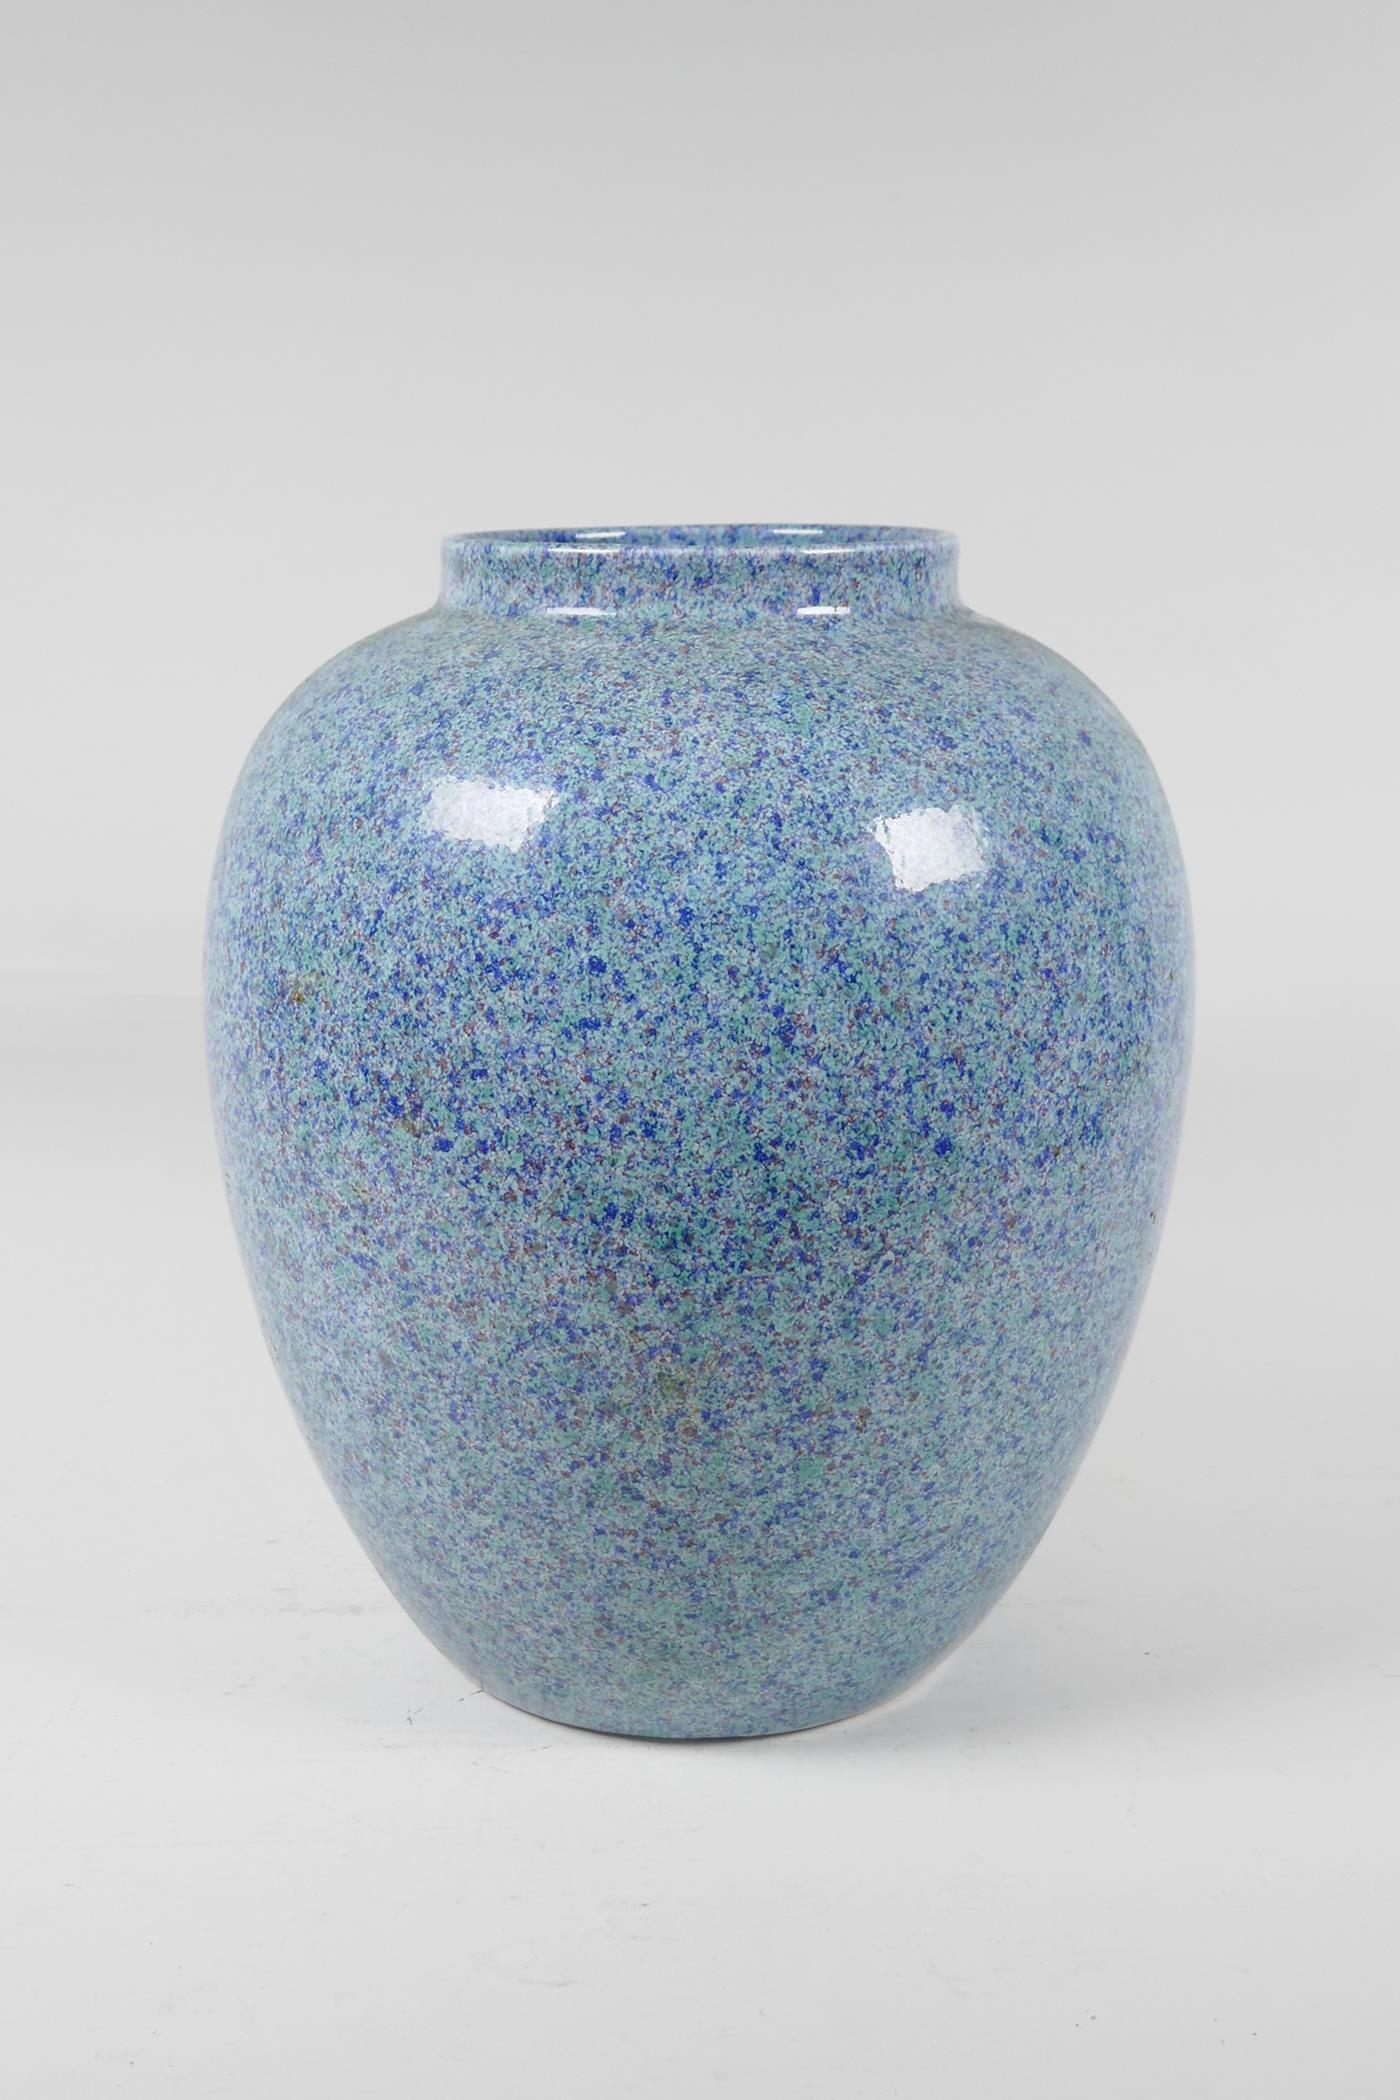 A Continental porcelain vase with a blue speckled glaze, 11" high